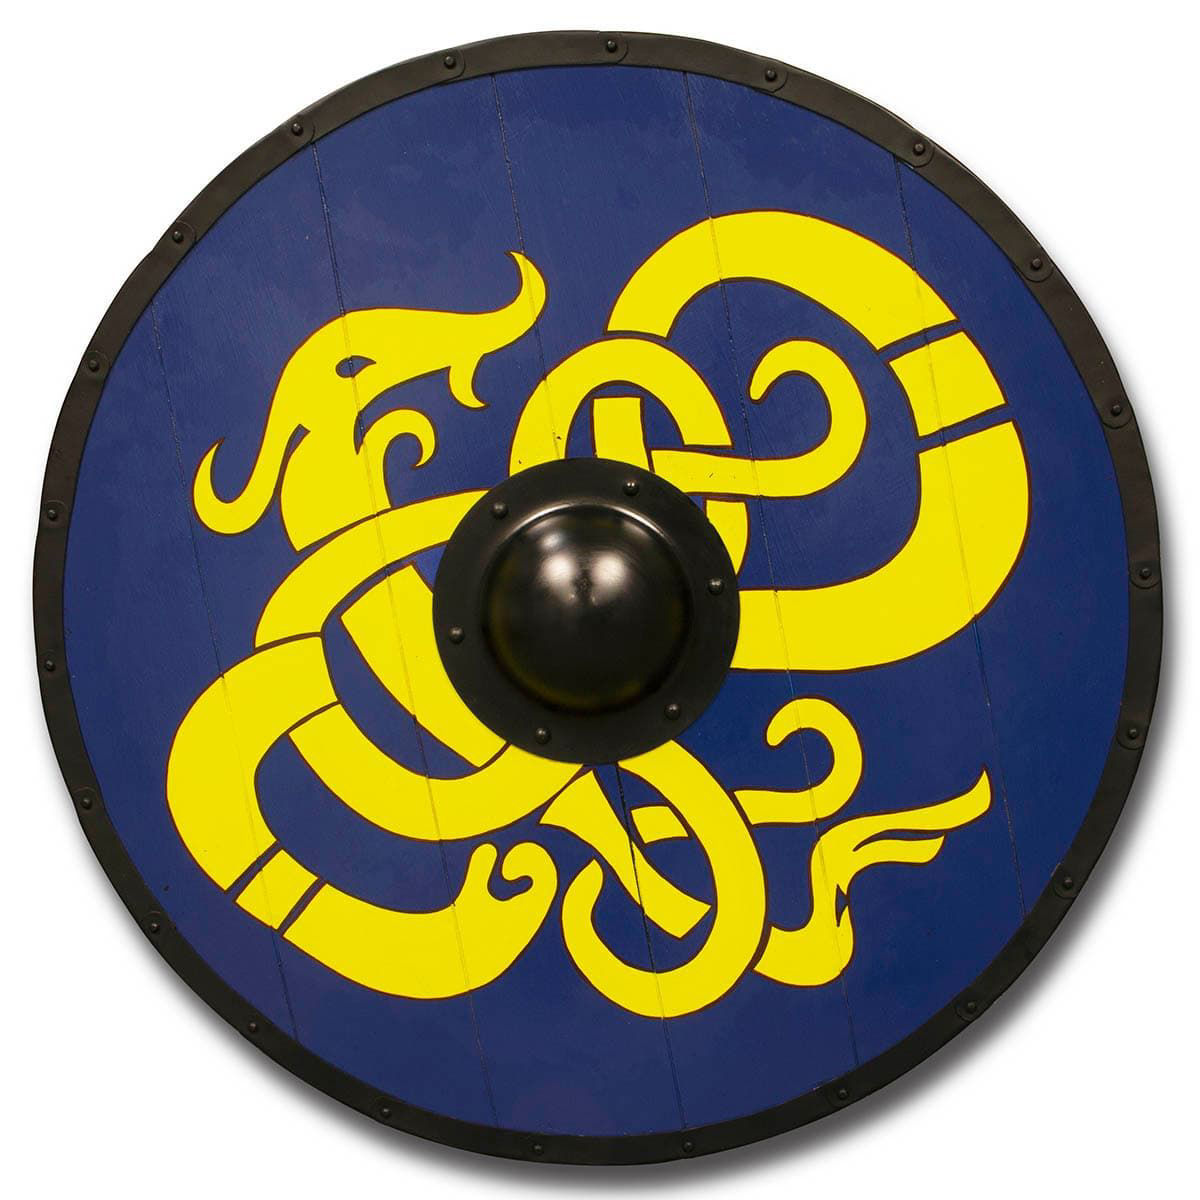 Viking Shield made with wood planks and hand-painted with Interlaced yellow dragon design is outlined in dark brown and set on a blue background